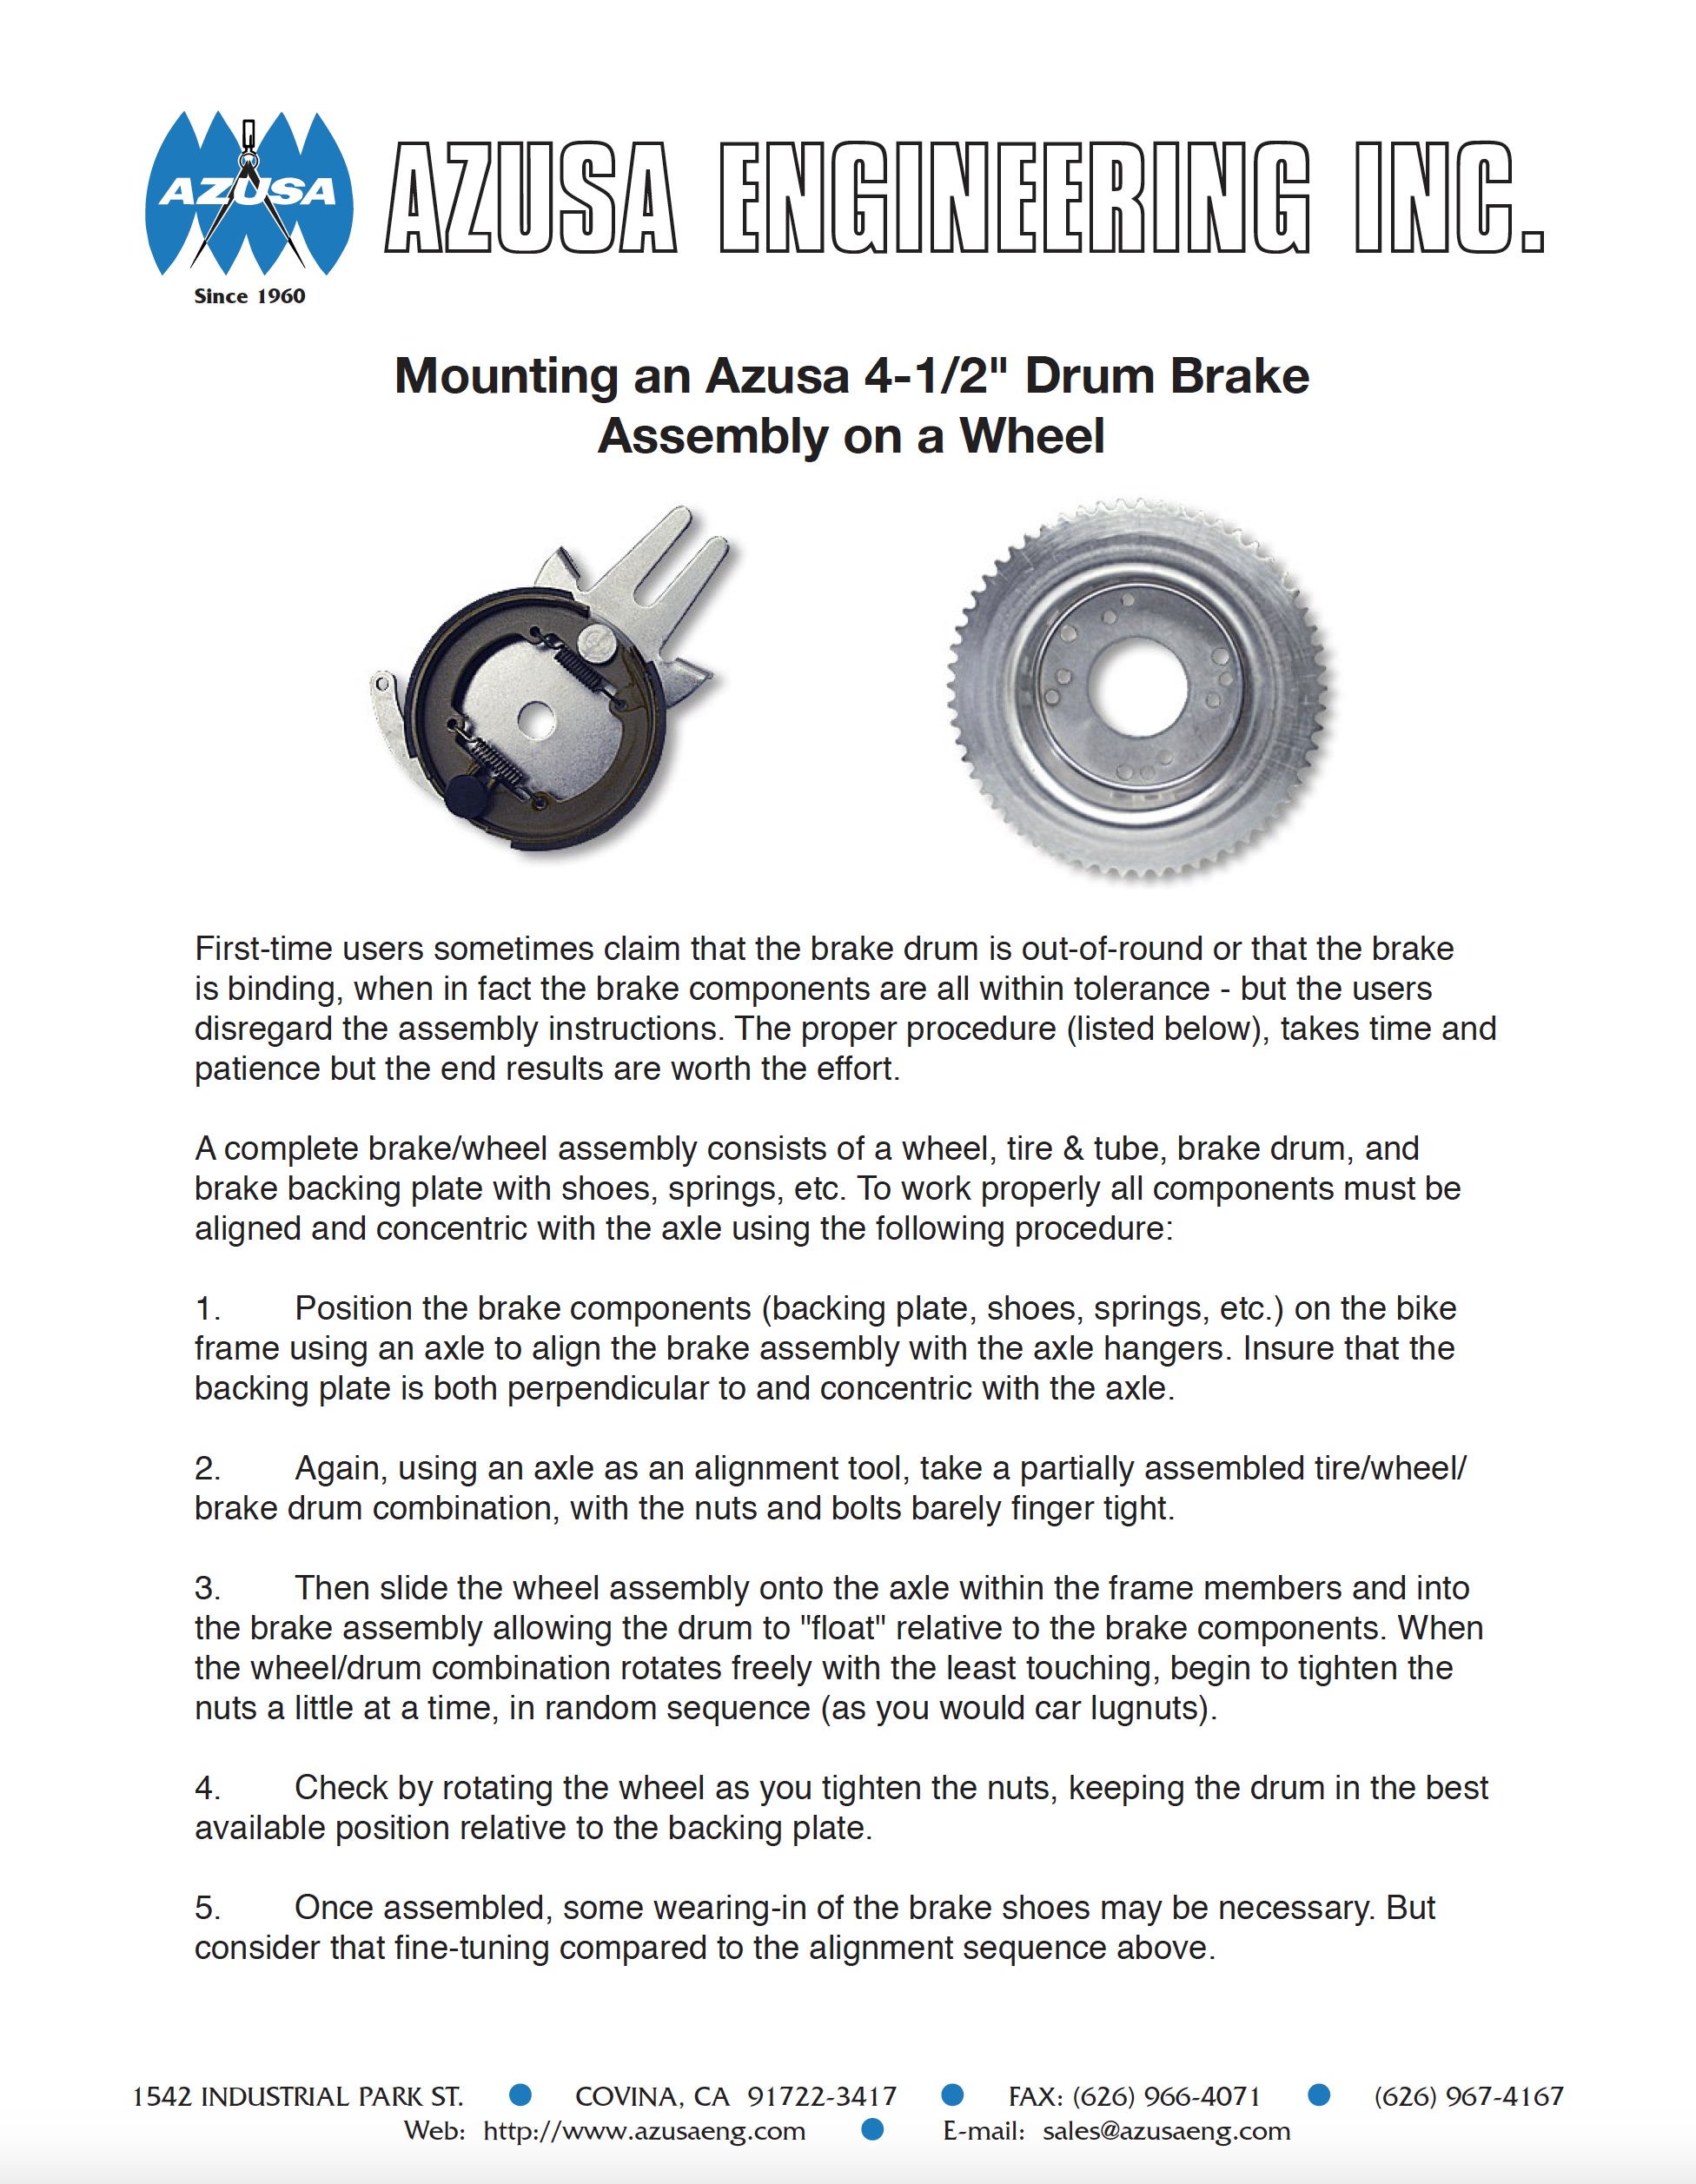 Image of PDF for "Mounting an Azusa 4-1/2" Drum Brake Assembly on a Wheel" Guidelines